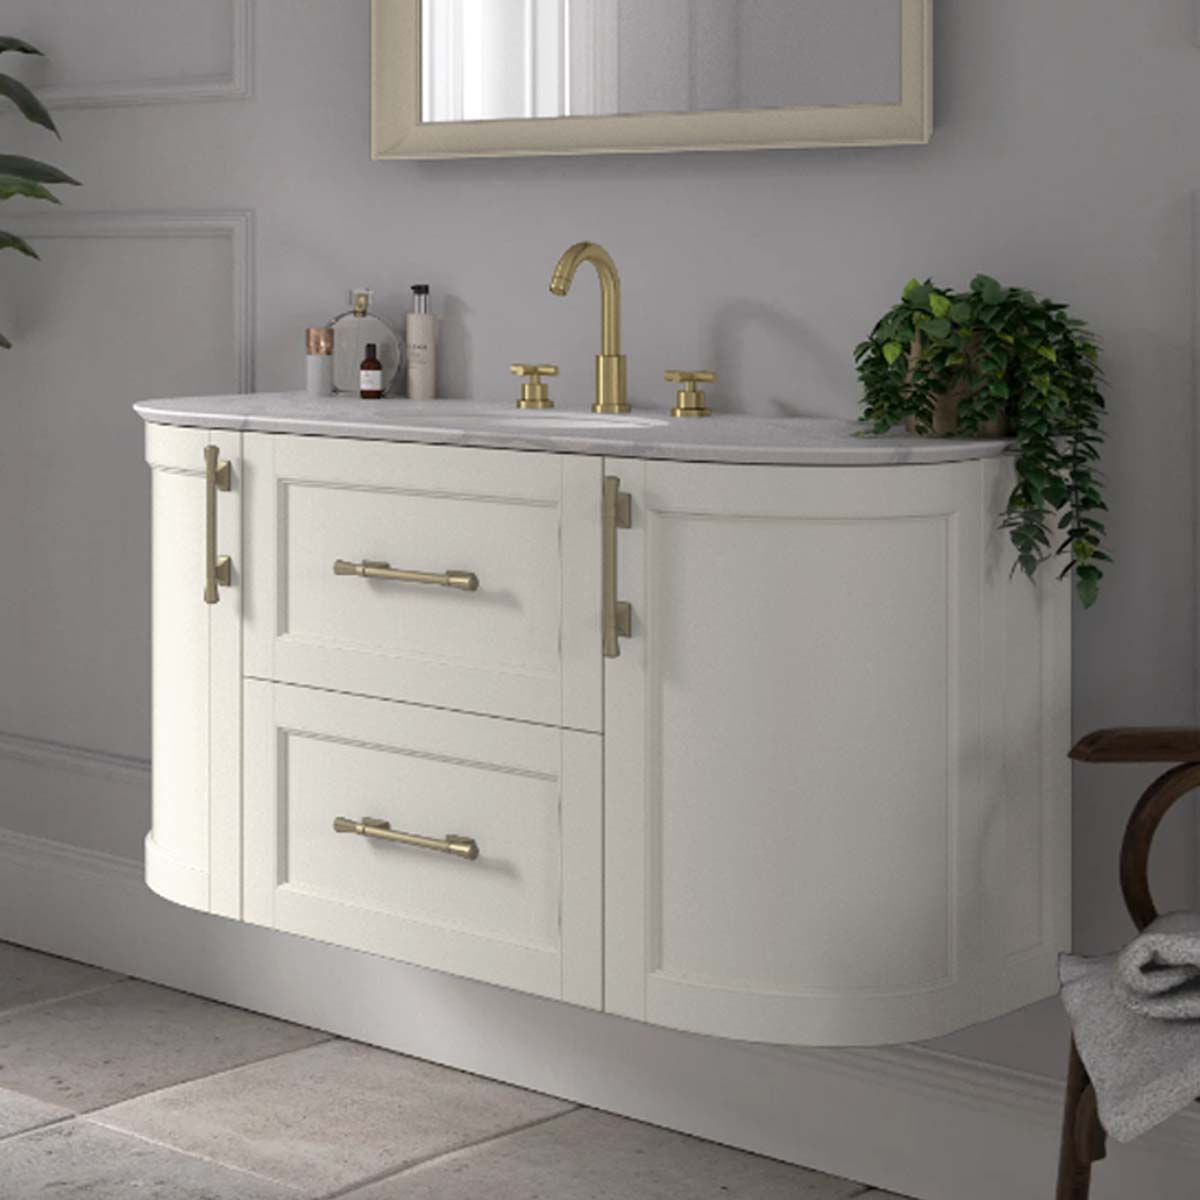 Utopia Roseberry Curved Wall Mounted Vanity Unit With Solid Surface Worktop and Undermount Basin - Cotton White